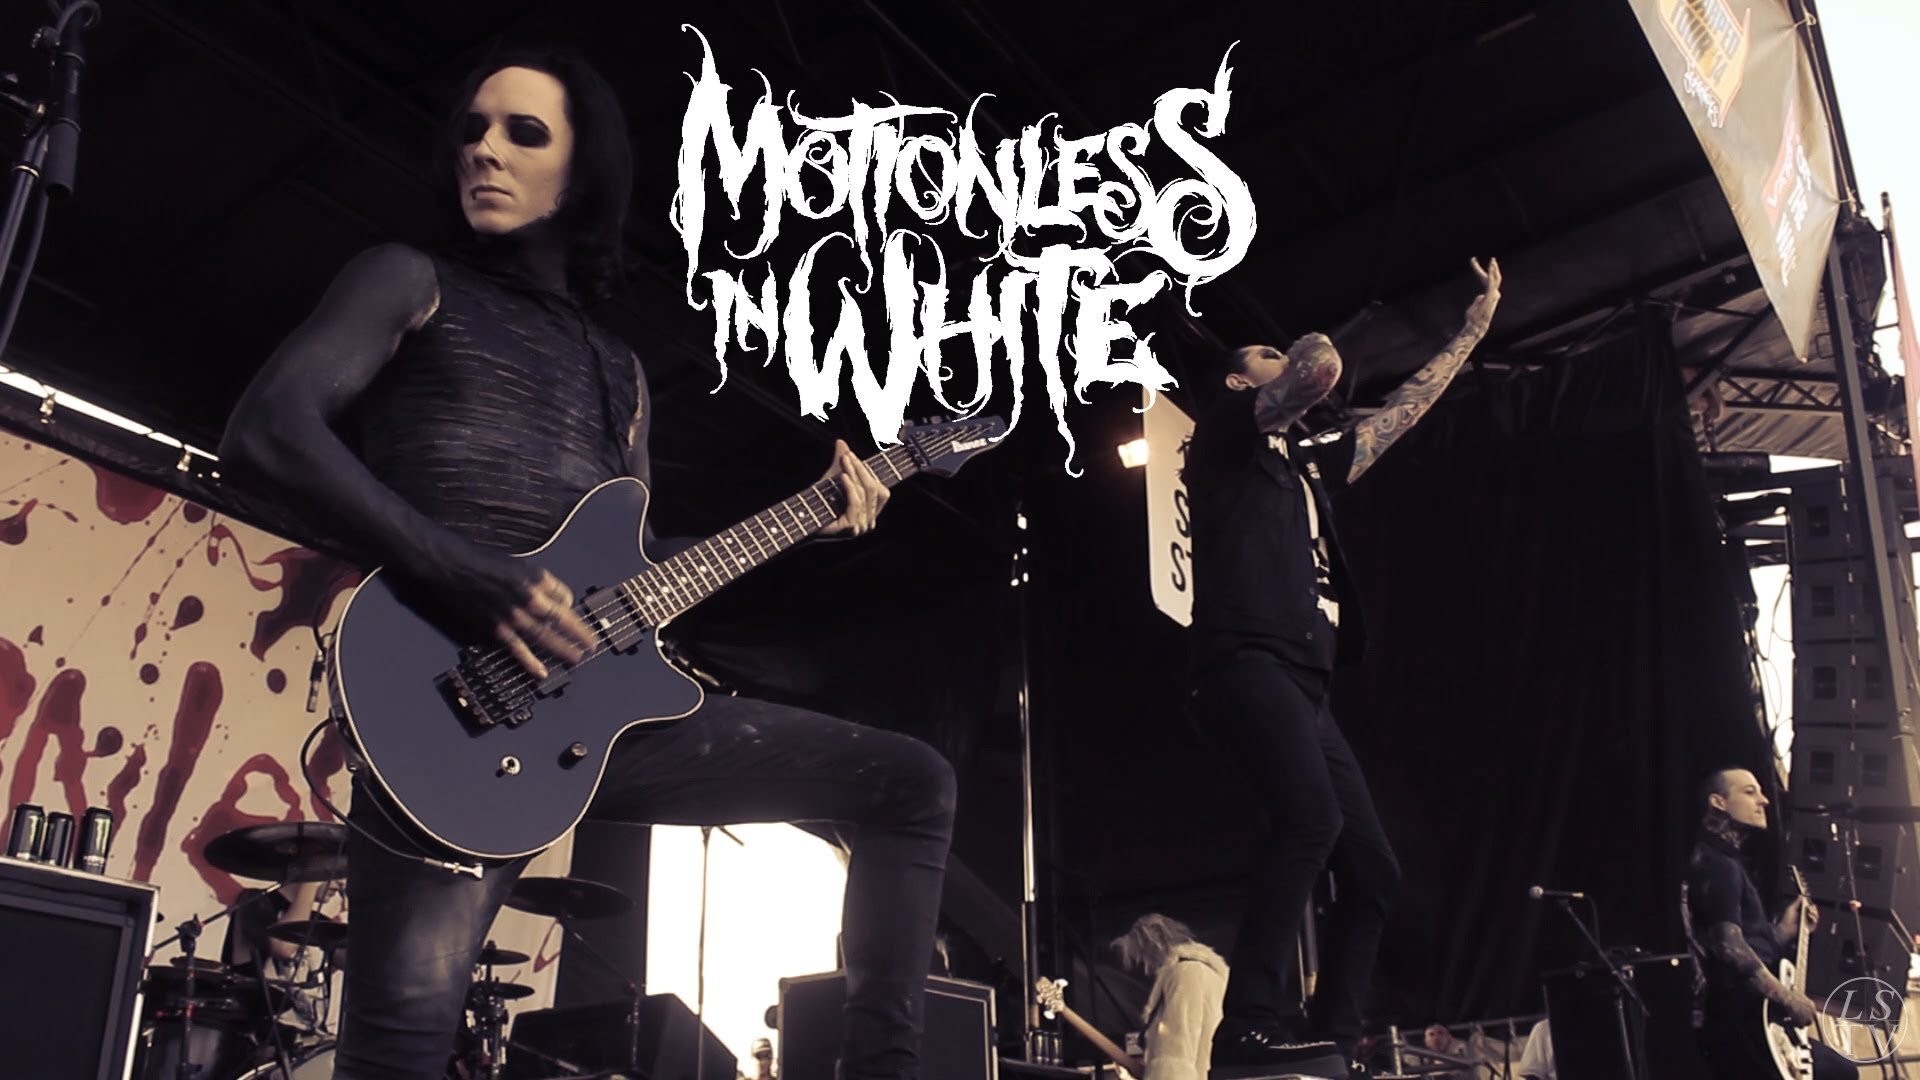 People 1920x1080 Motionless In White metalcore alternative metal  concerts band rock music